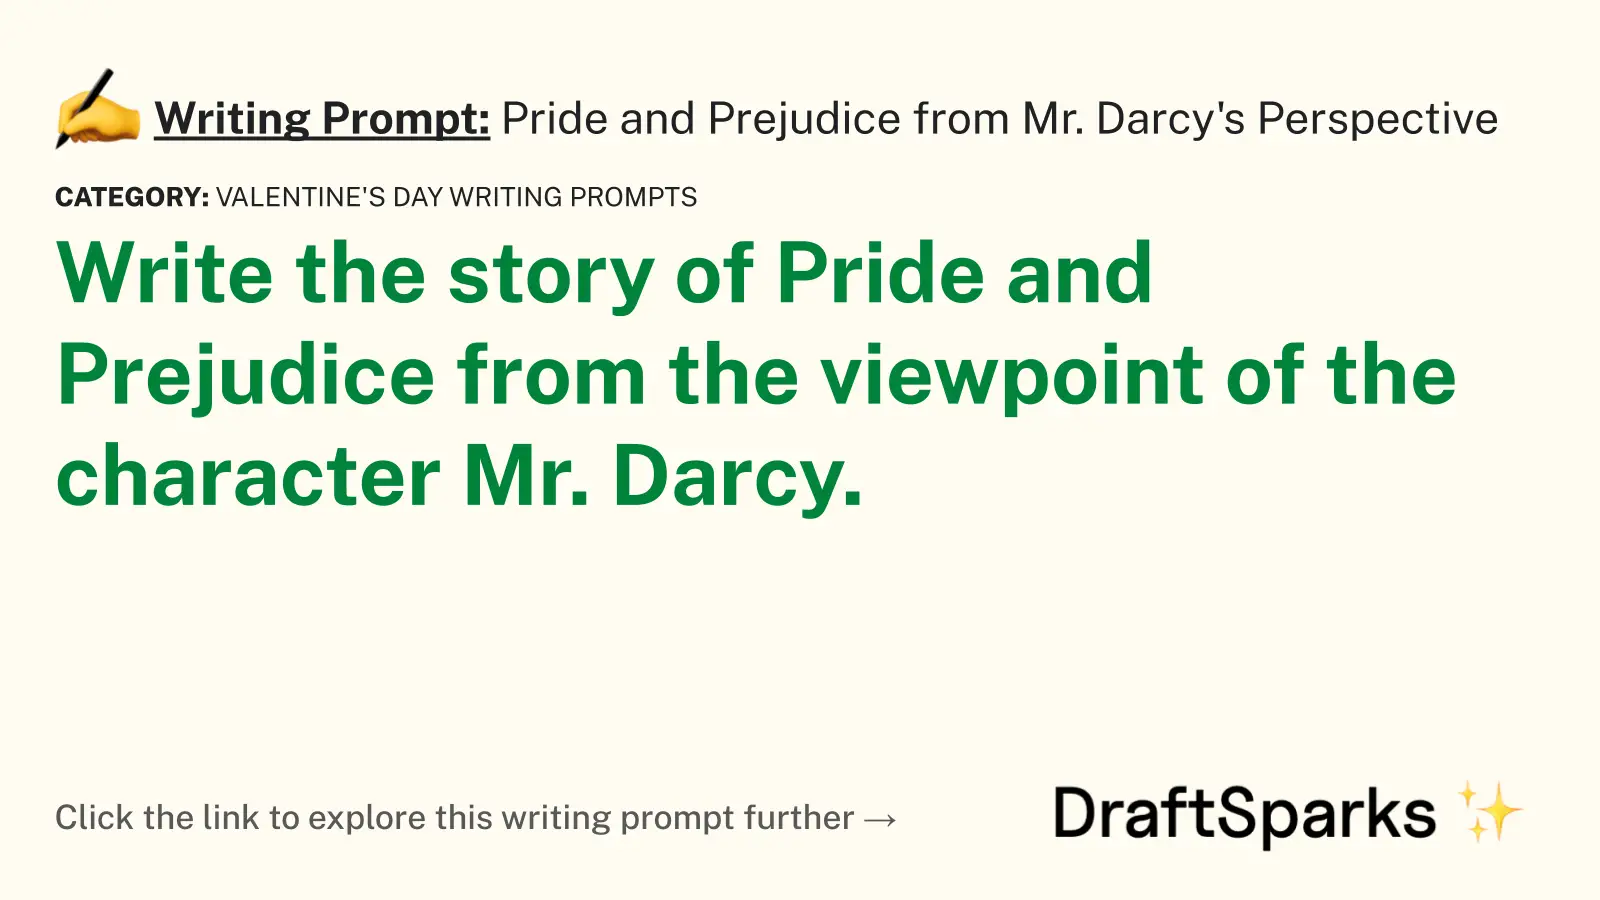 Pride and Prejudice from Mr. Darcy’s Perspective